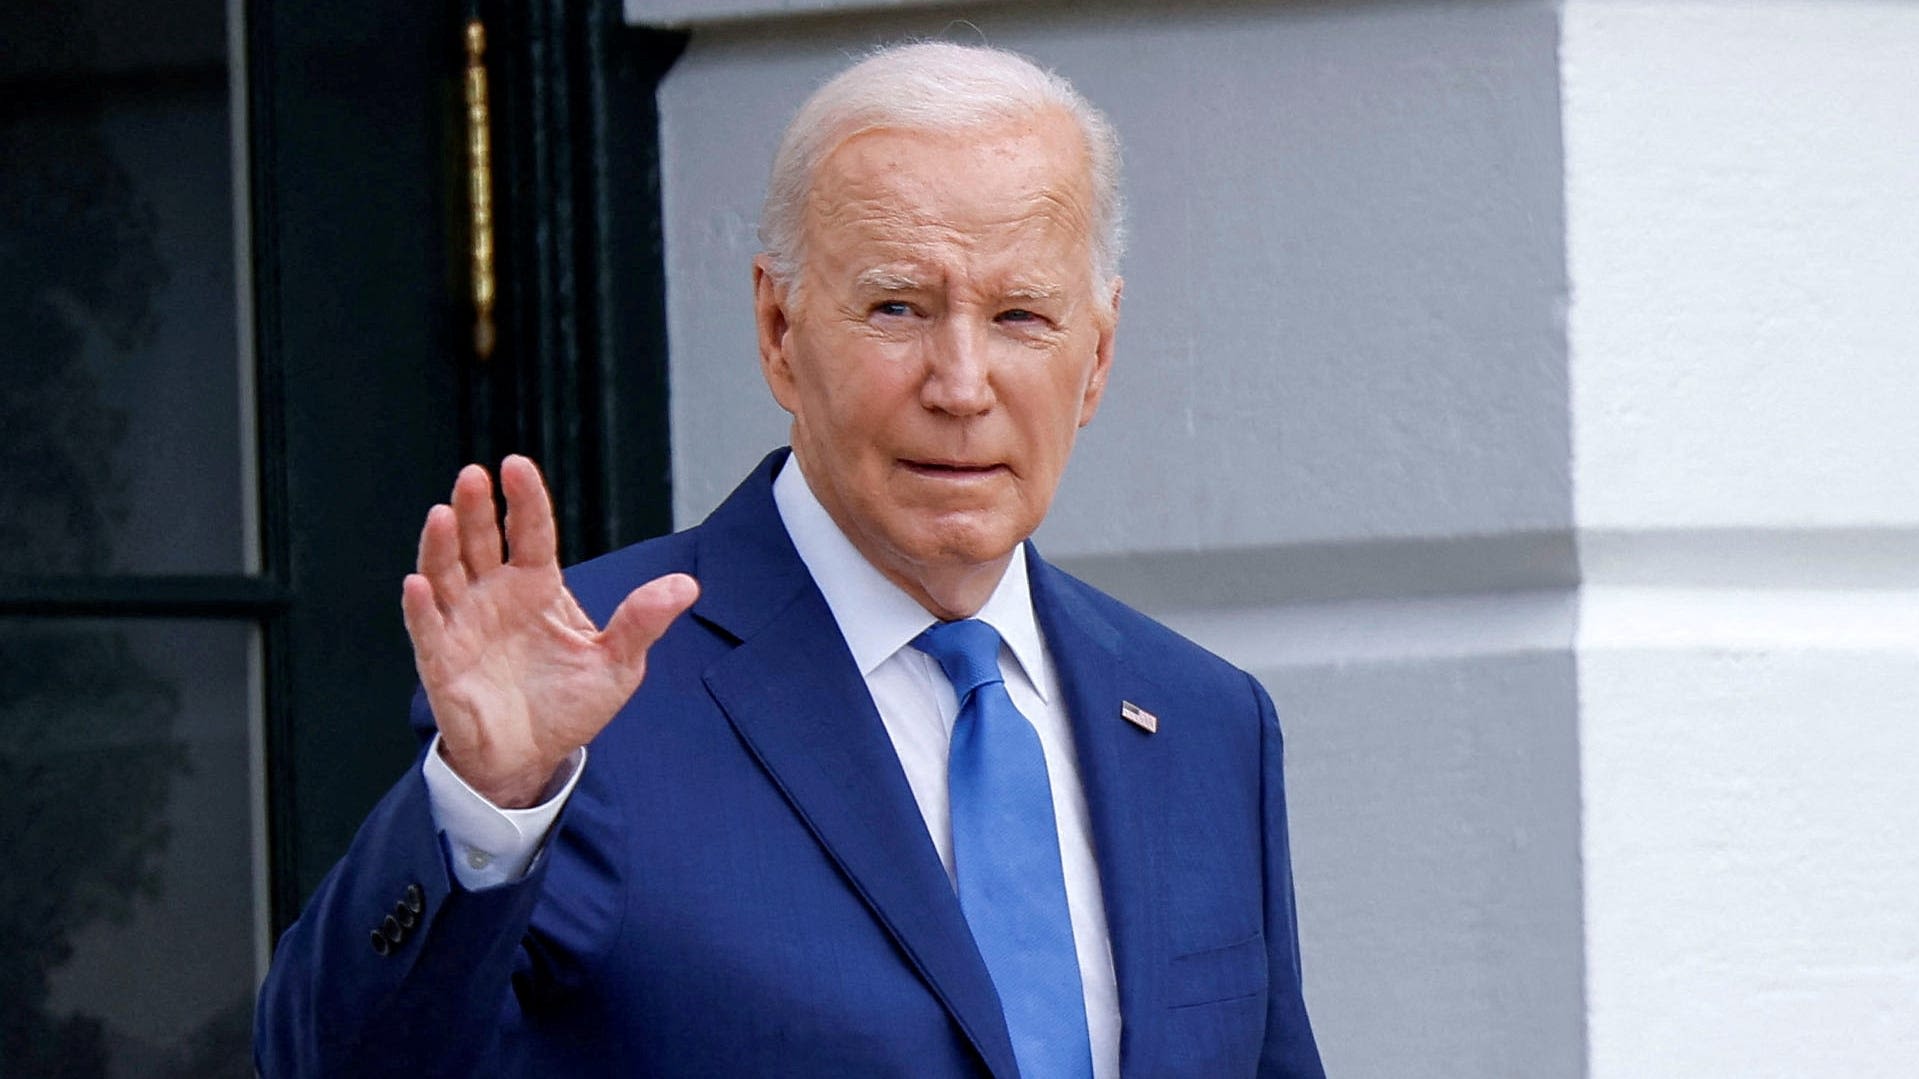 New Biden tariffs on China's EVs, solar, medical supplies due Tuesday, sources say